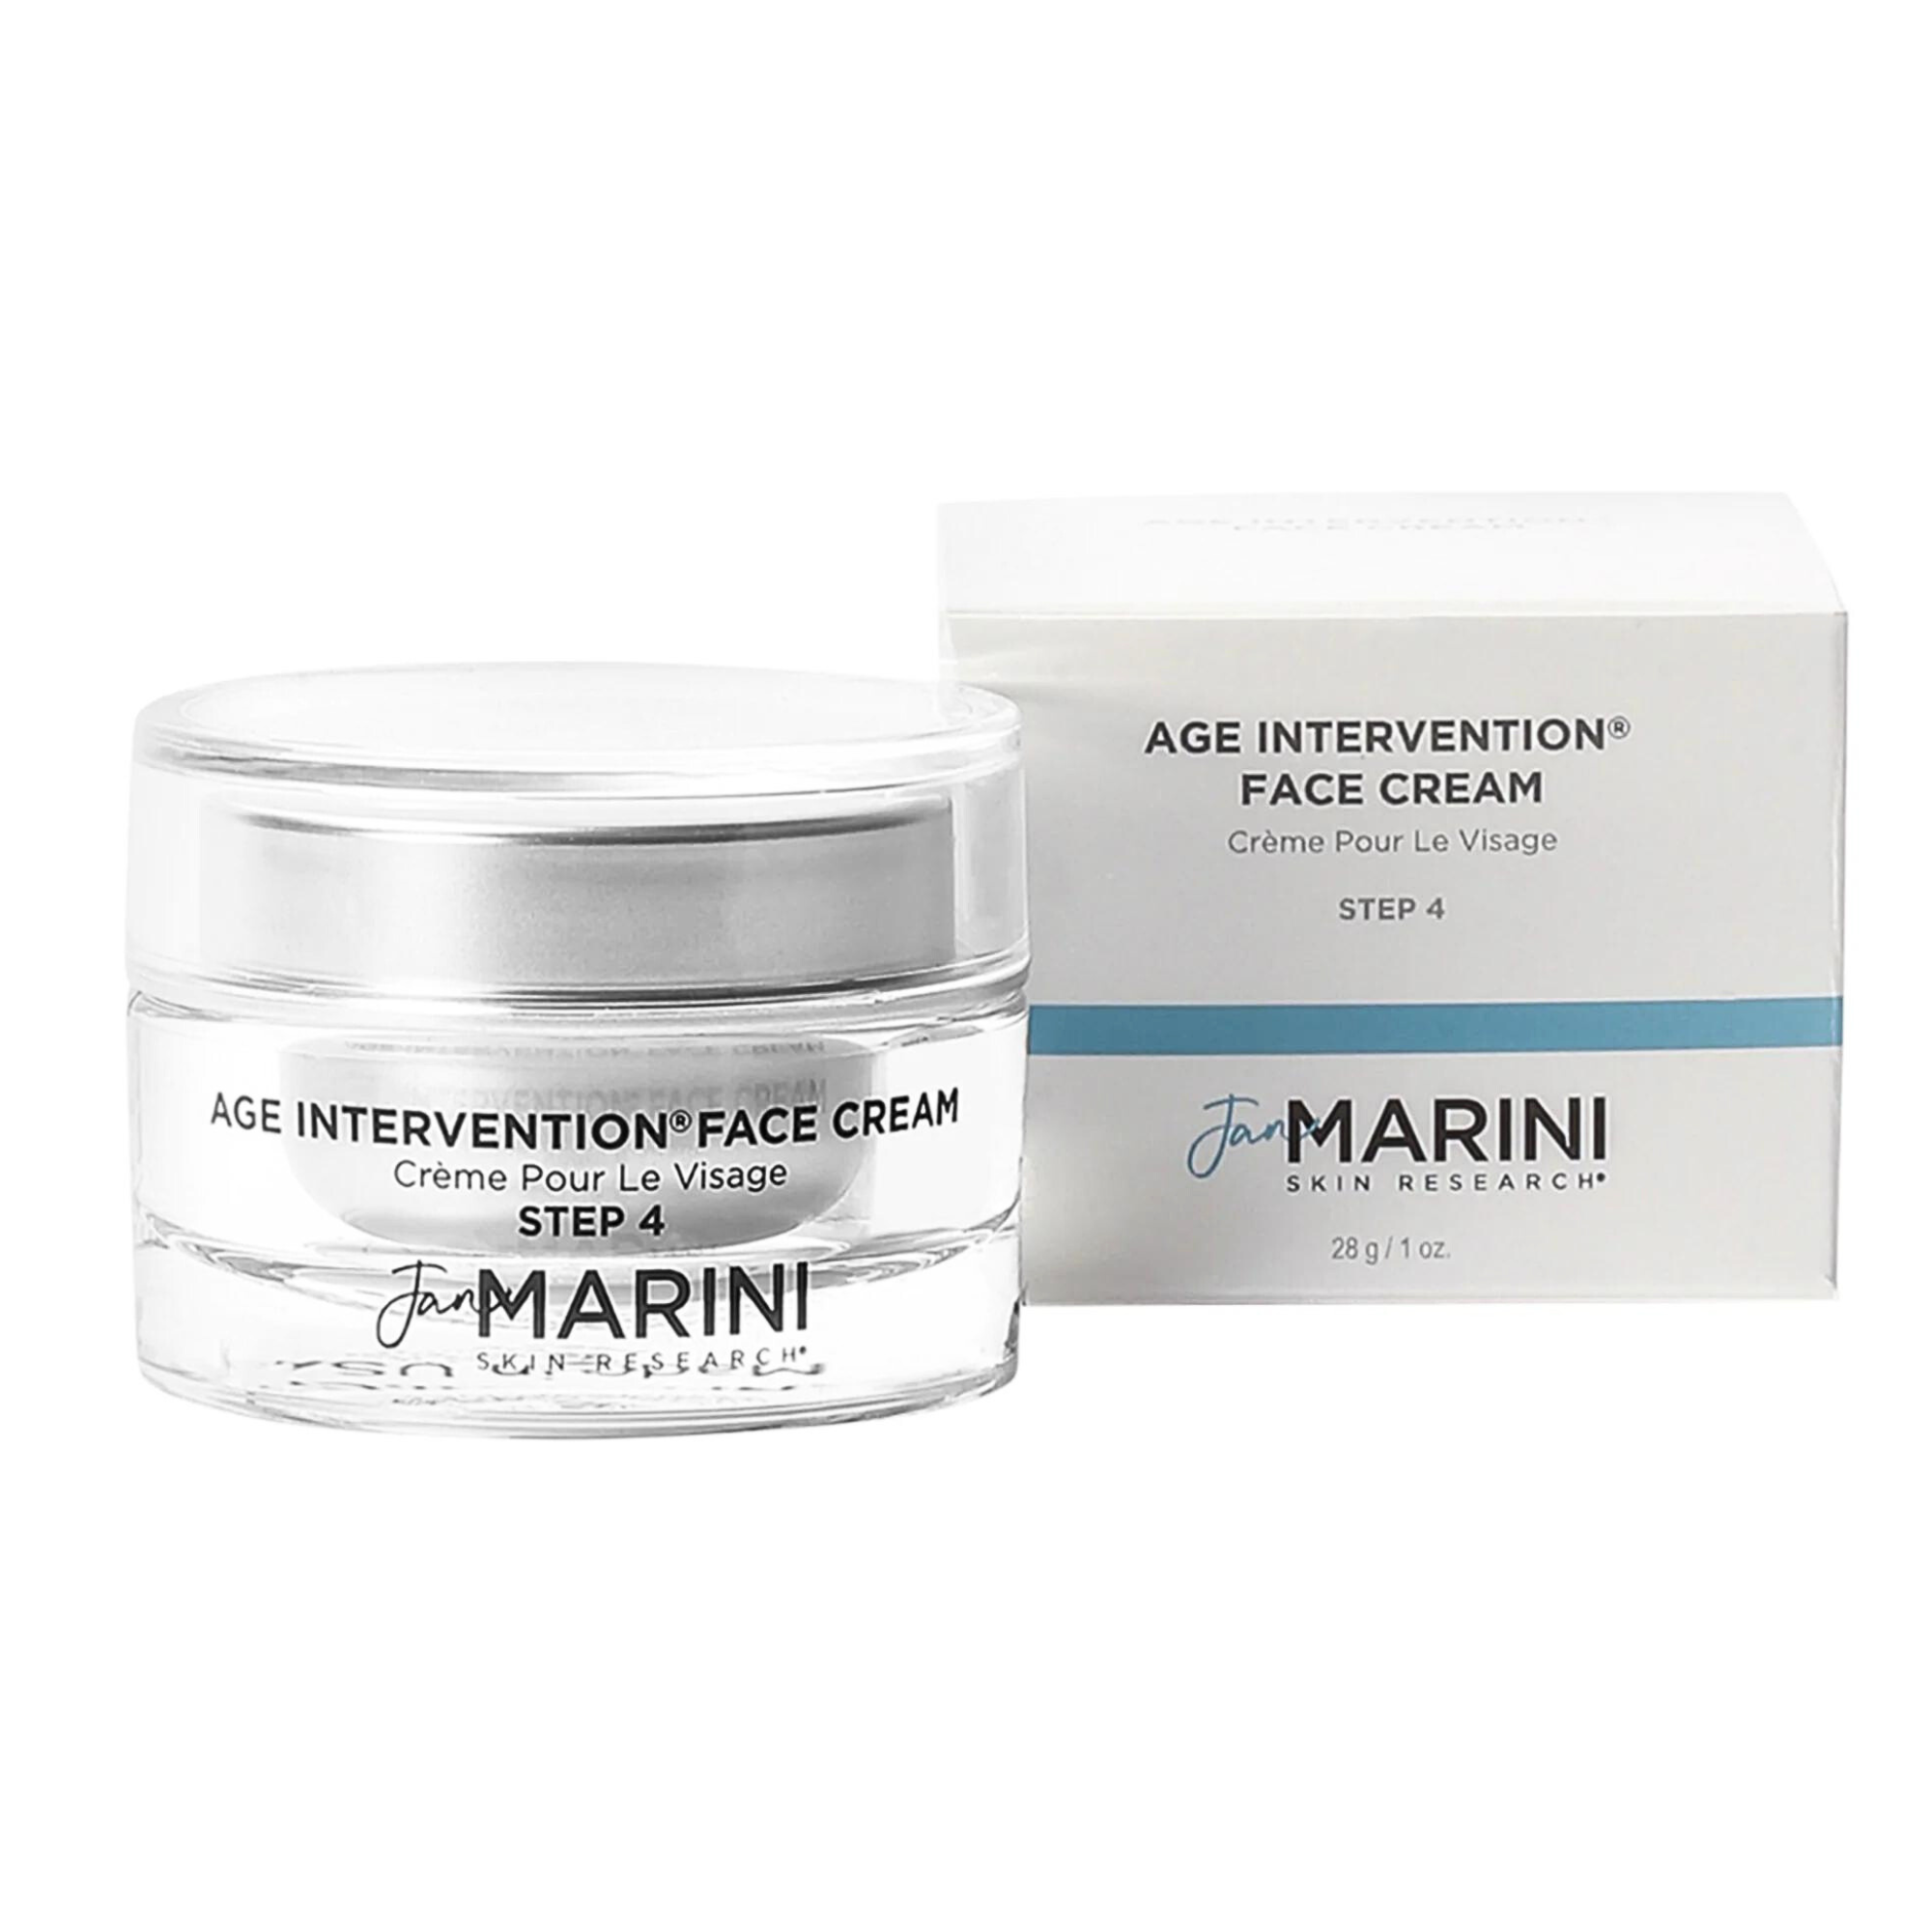 Jan Marini Age Intervention Face Cream Shop at EXCLUSIVE BEAUTY CLUB